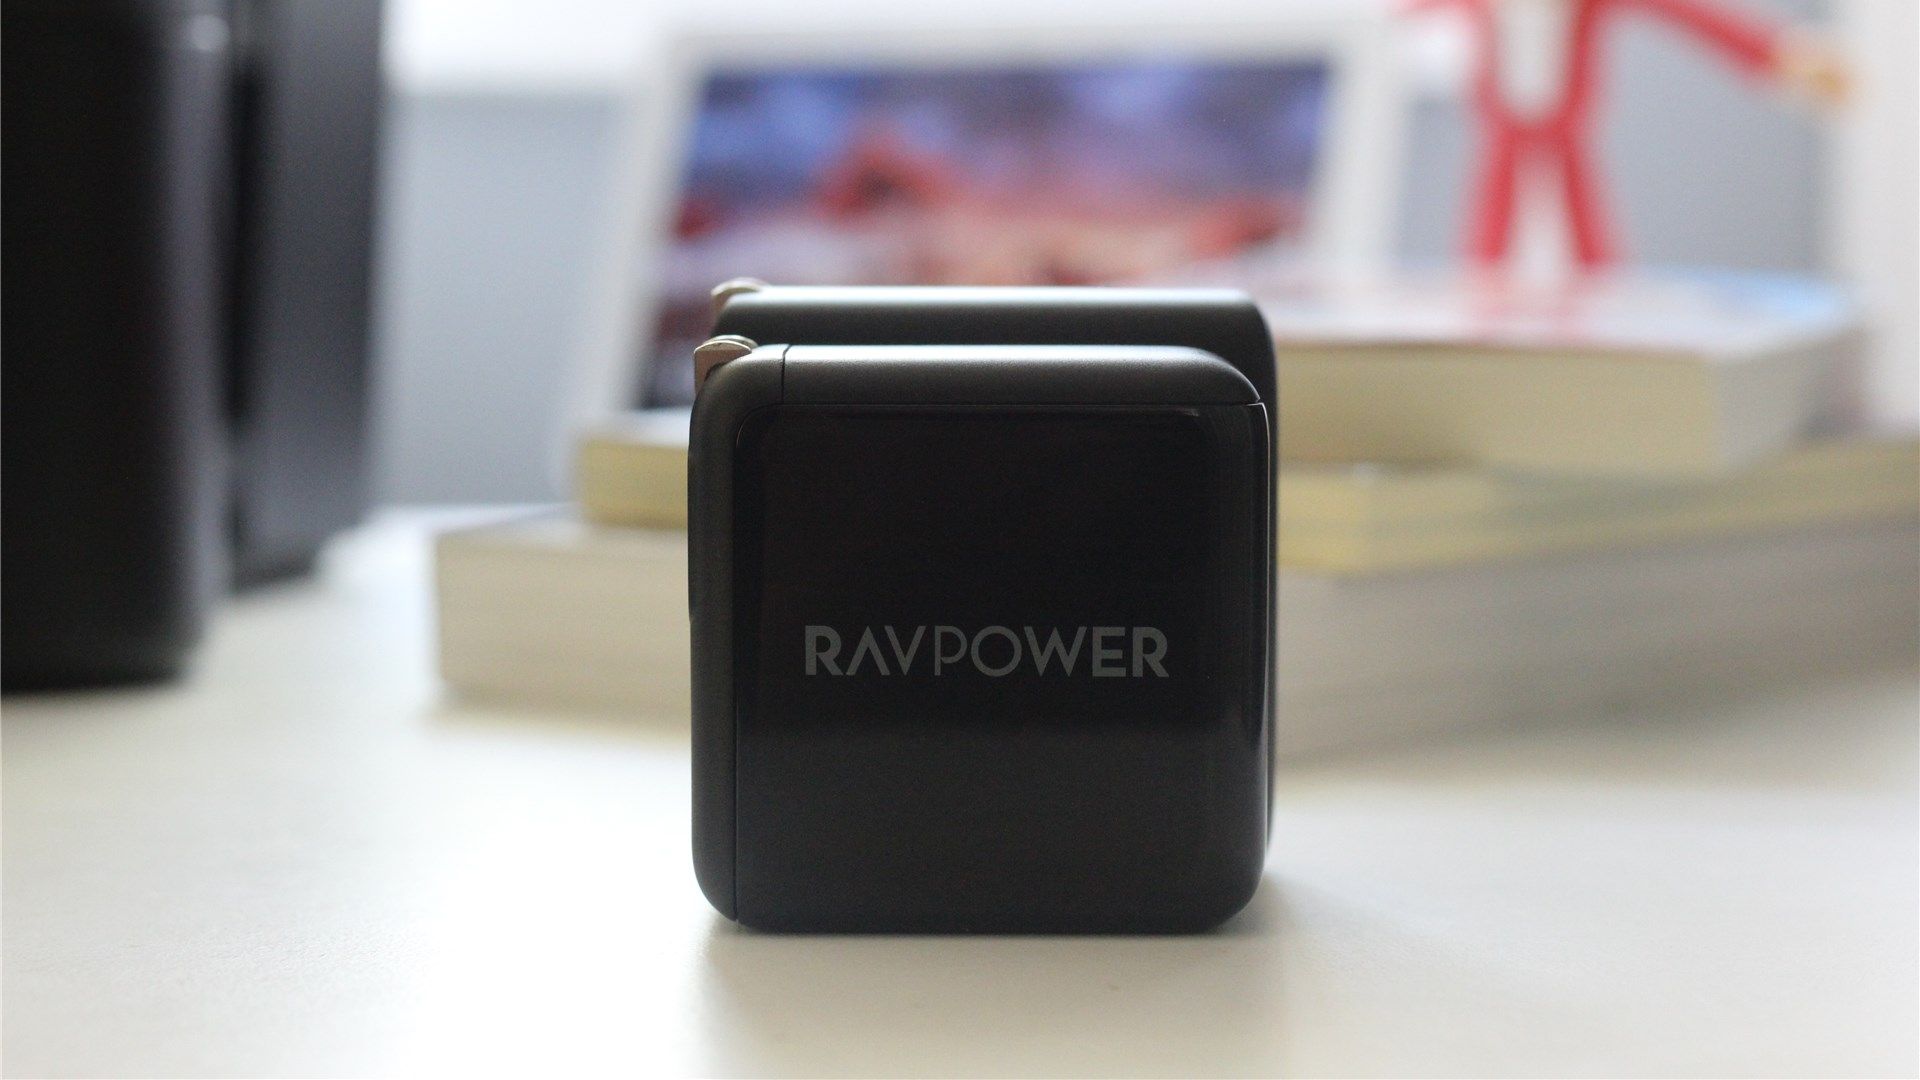 The RavPower PC151 in front, Aukey 63w charger in the back